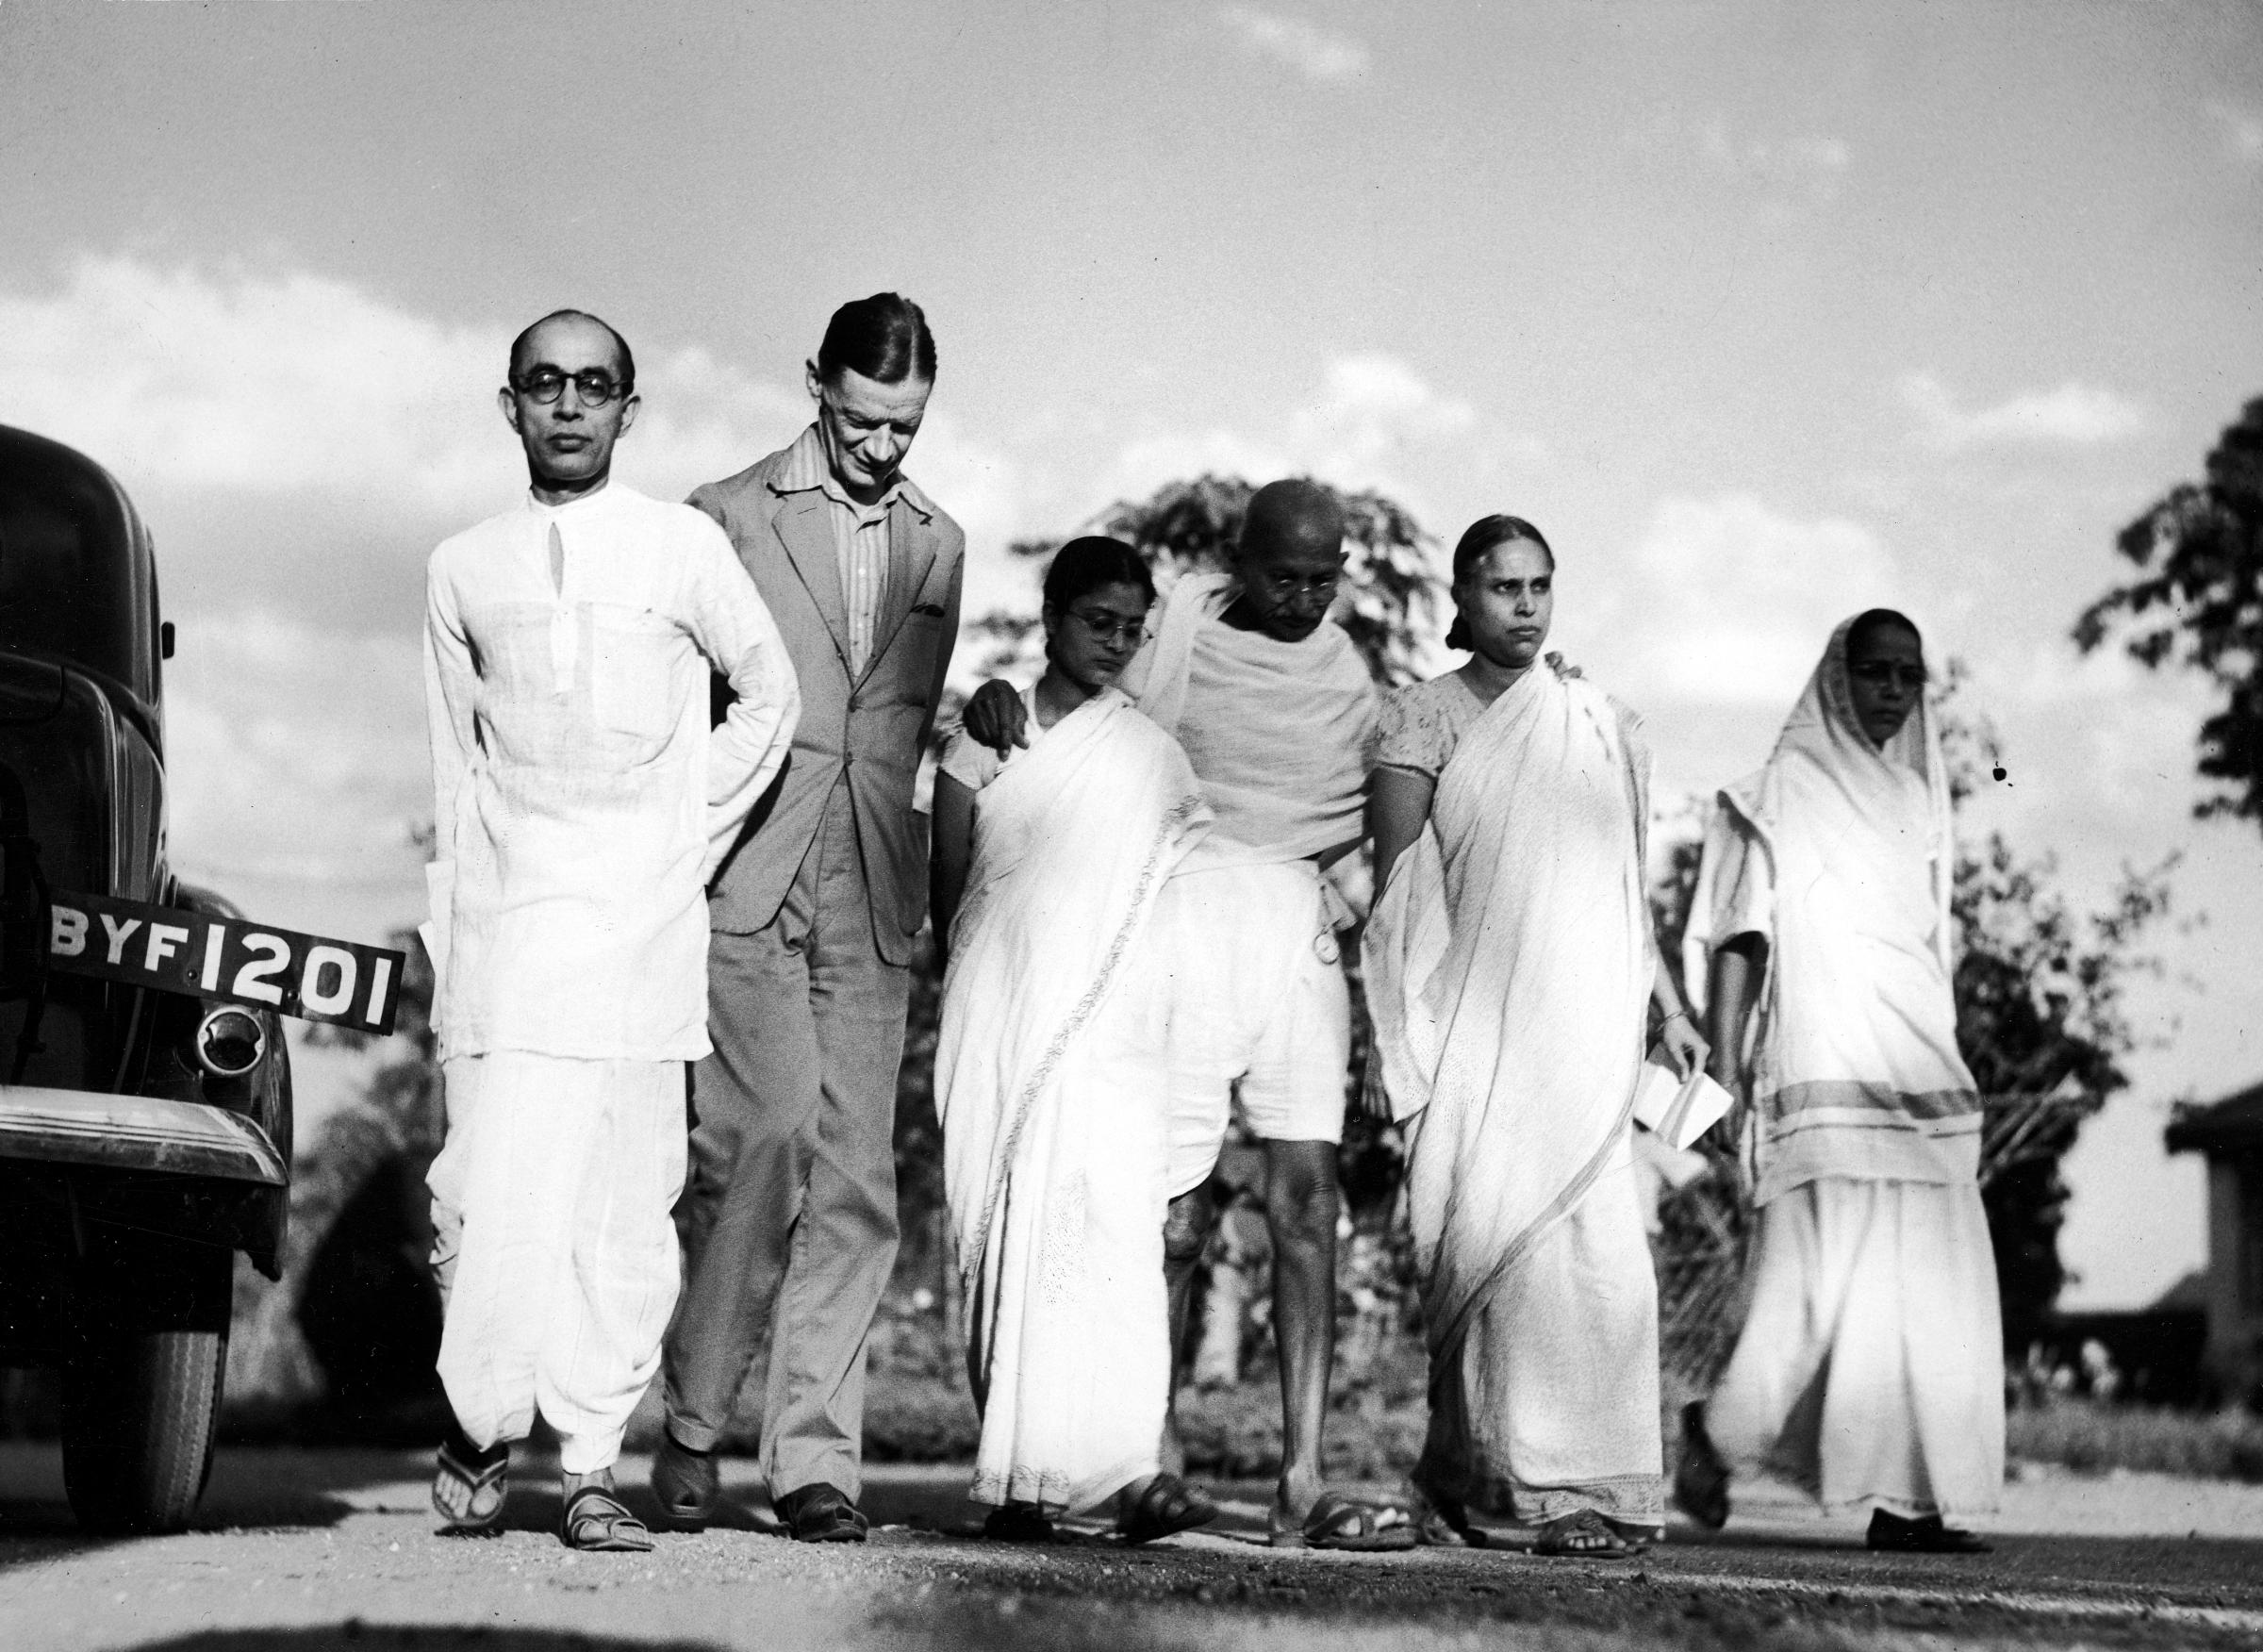 Gandhi, center, is shown walking with family members and an official (in suit) from the Friend's Ambulance Unit -- an international organization focused on famine relief -- in 1946.